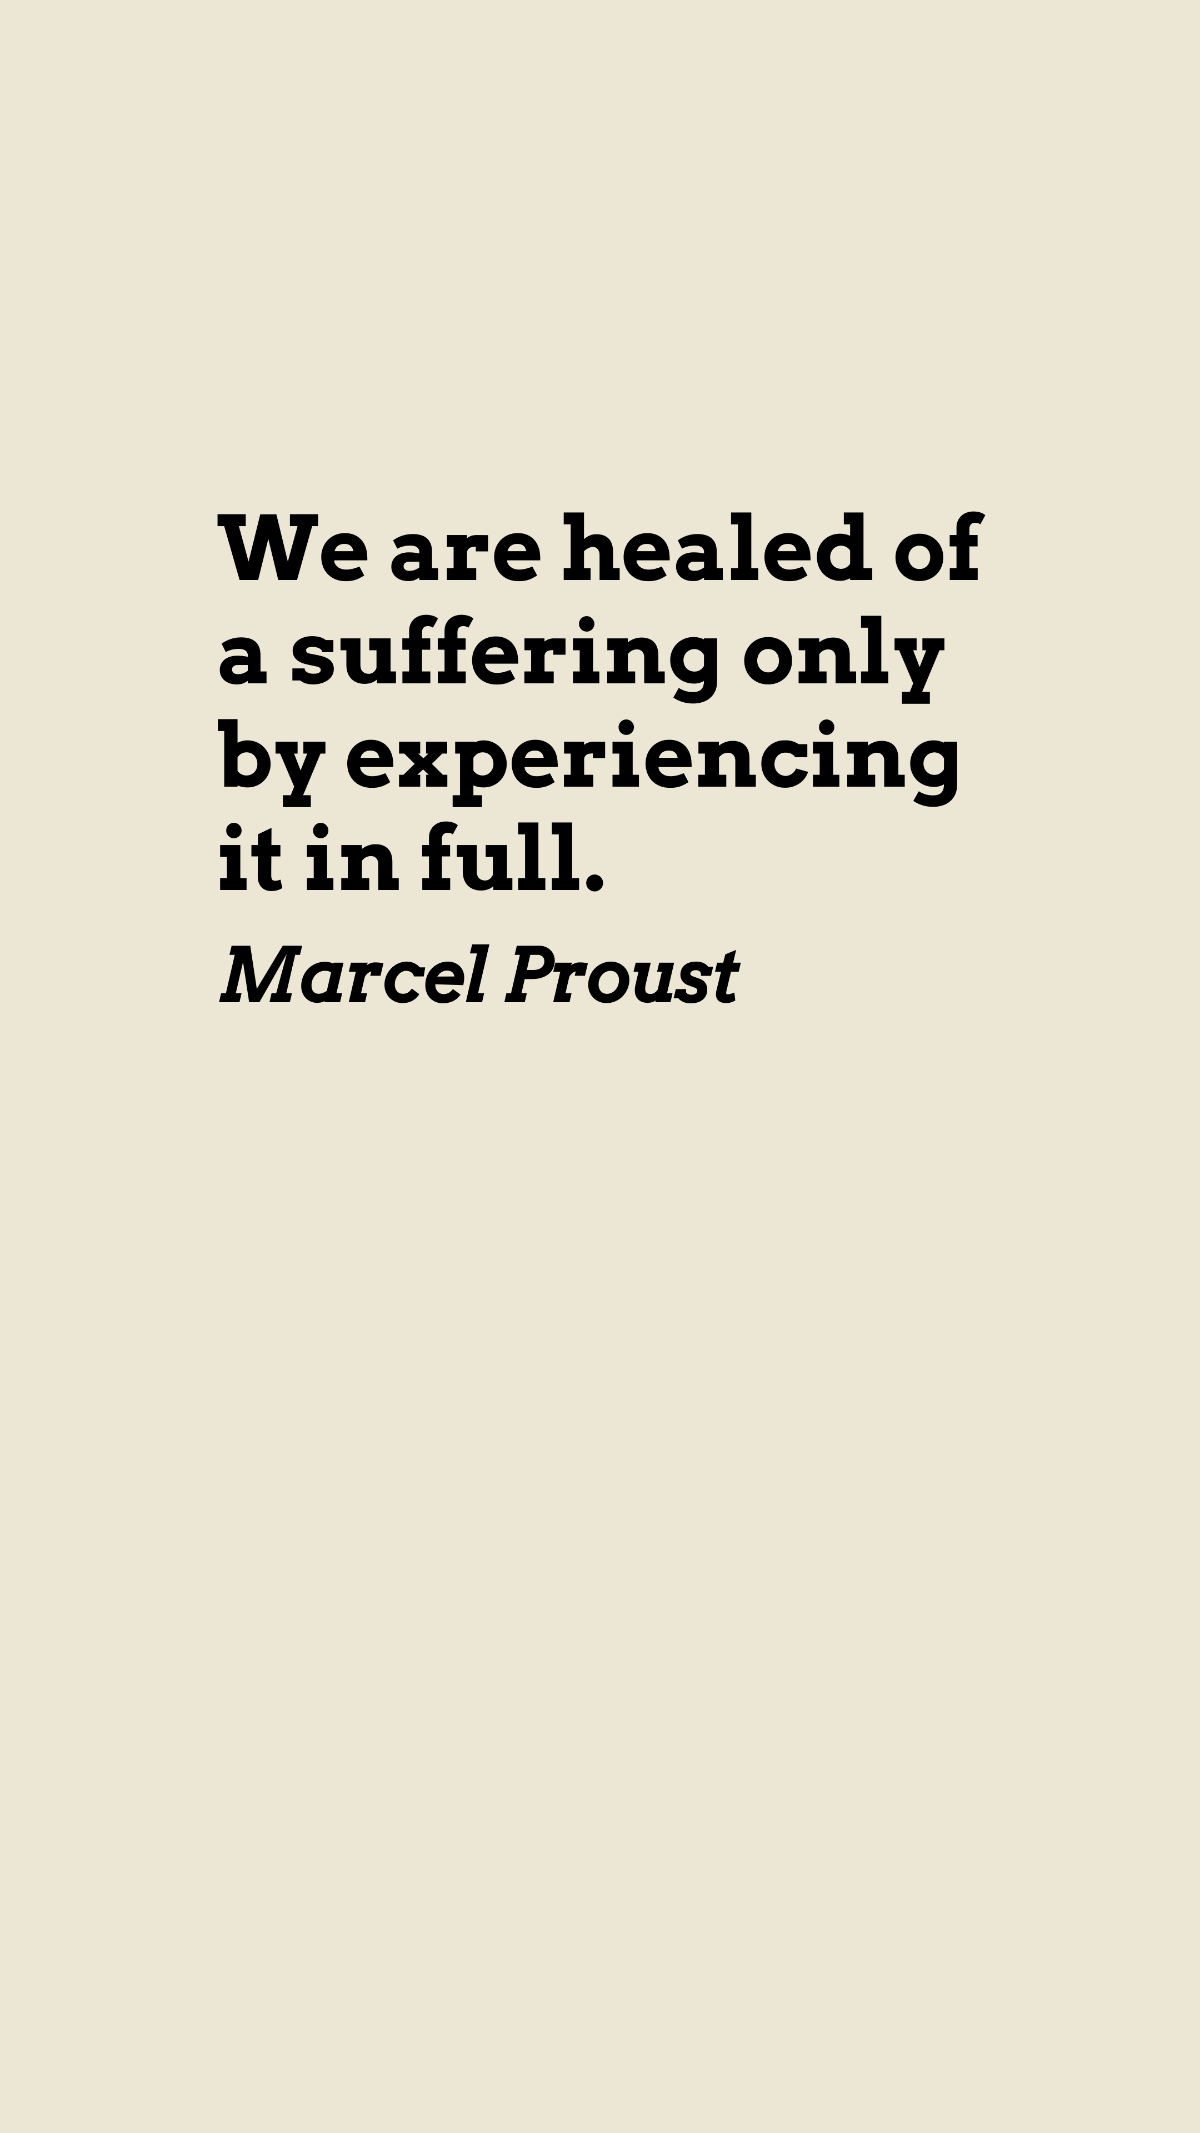 Marcel Proust - We are healed of a suffering only by experiencing it in full. Template